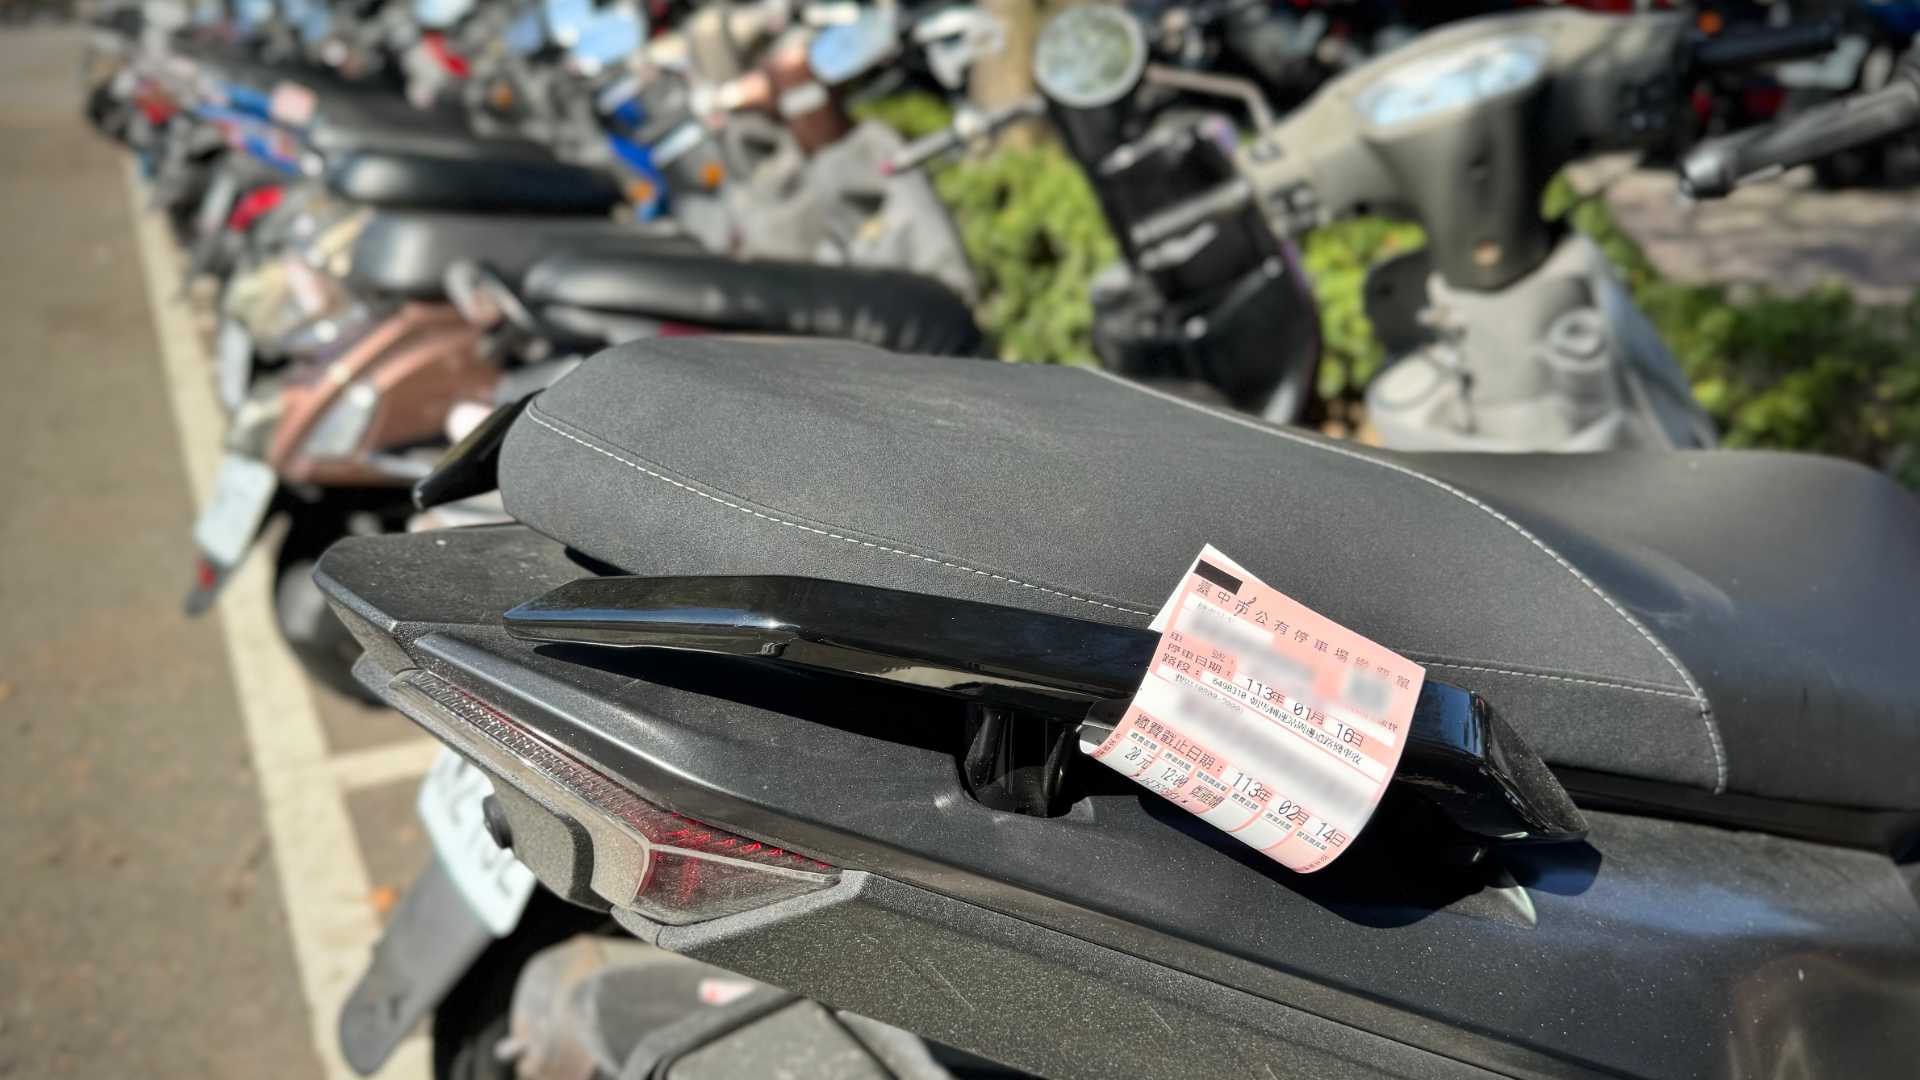 A parking ticket affixed to the rear handles of an SYM MMBCU scooter.